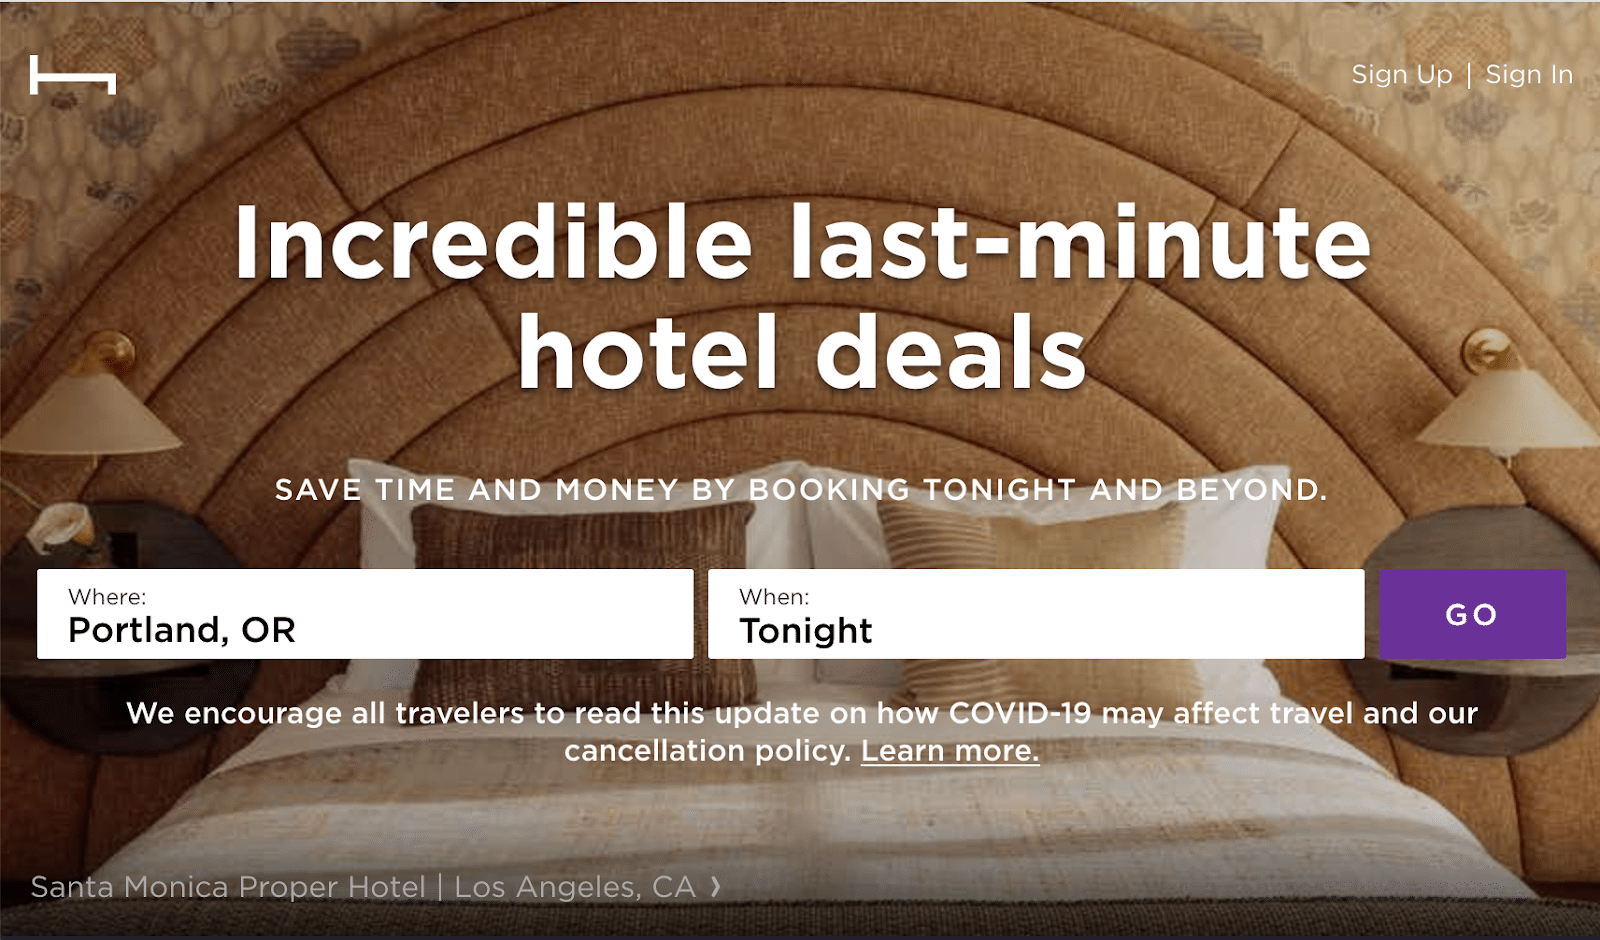 How hotels with last-minute deals increase bookings?